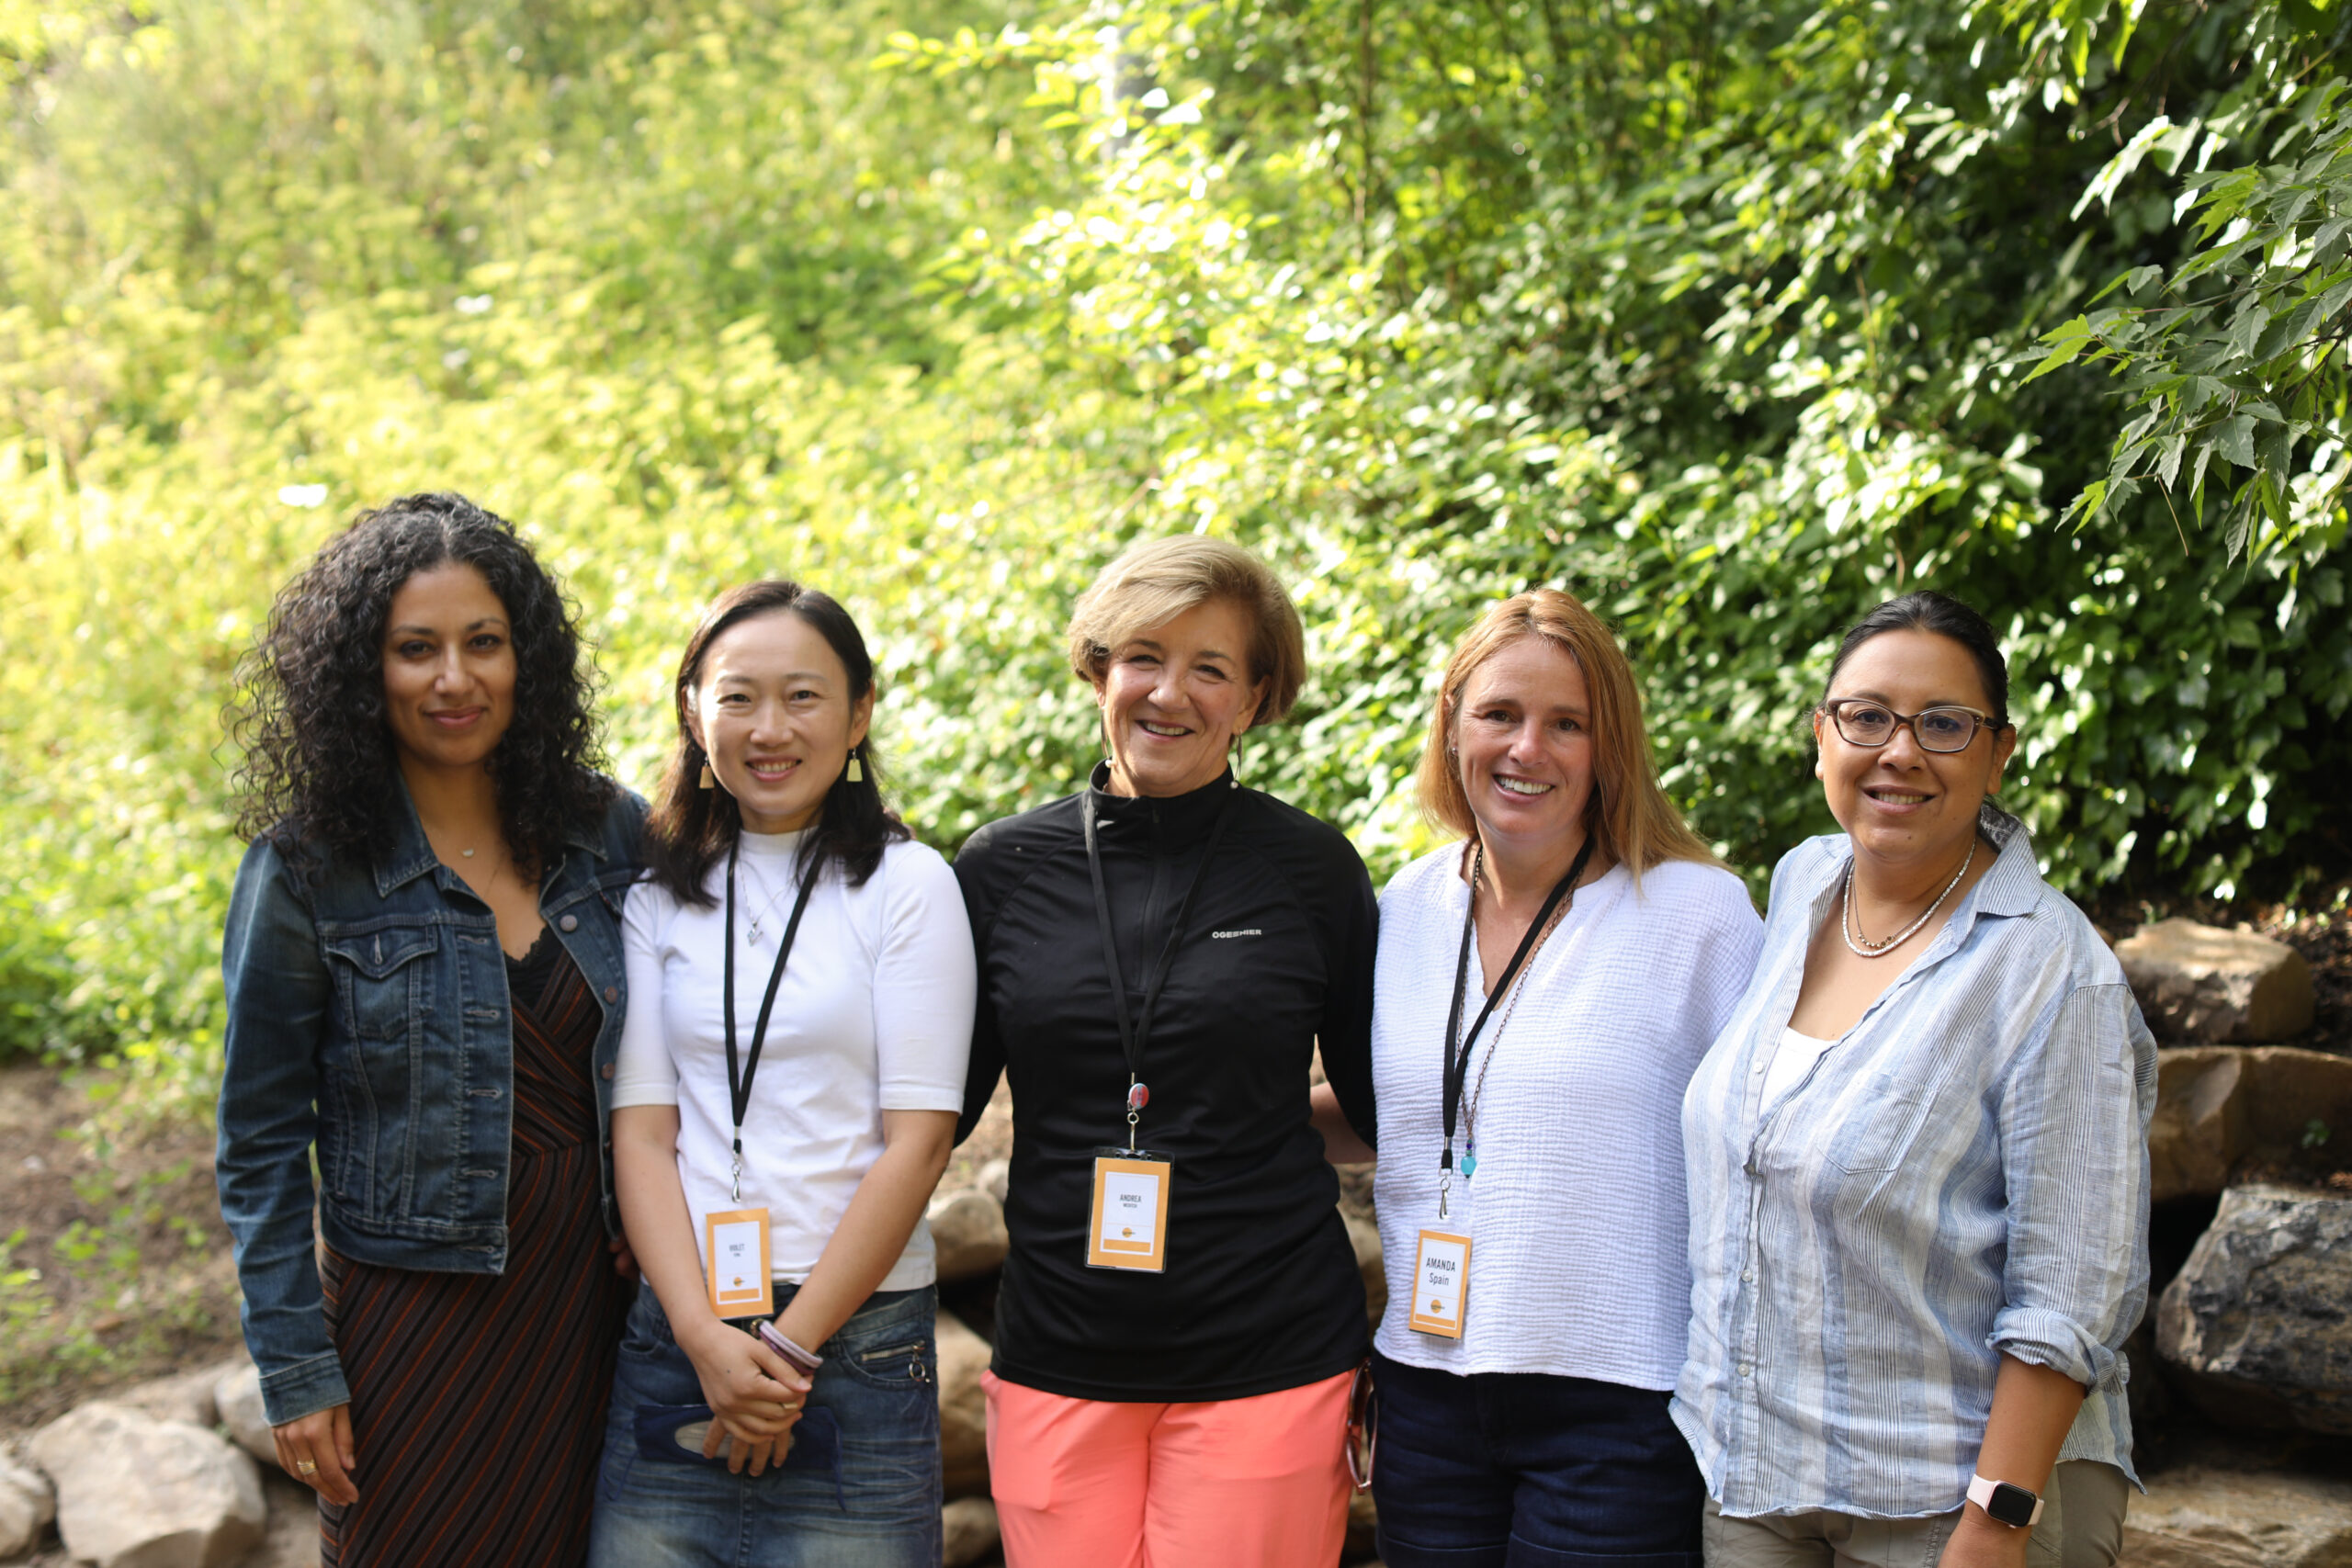 A communal moment at the 2022 Creative Producing Lab. From left to right: Daffodil Altan, Violet Feng, Andrea Meditch, Amanda Spain, Carrie Lozano. (Photo by Maya Dehlin)